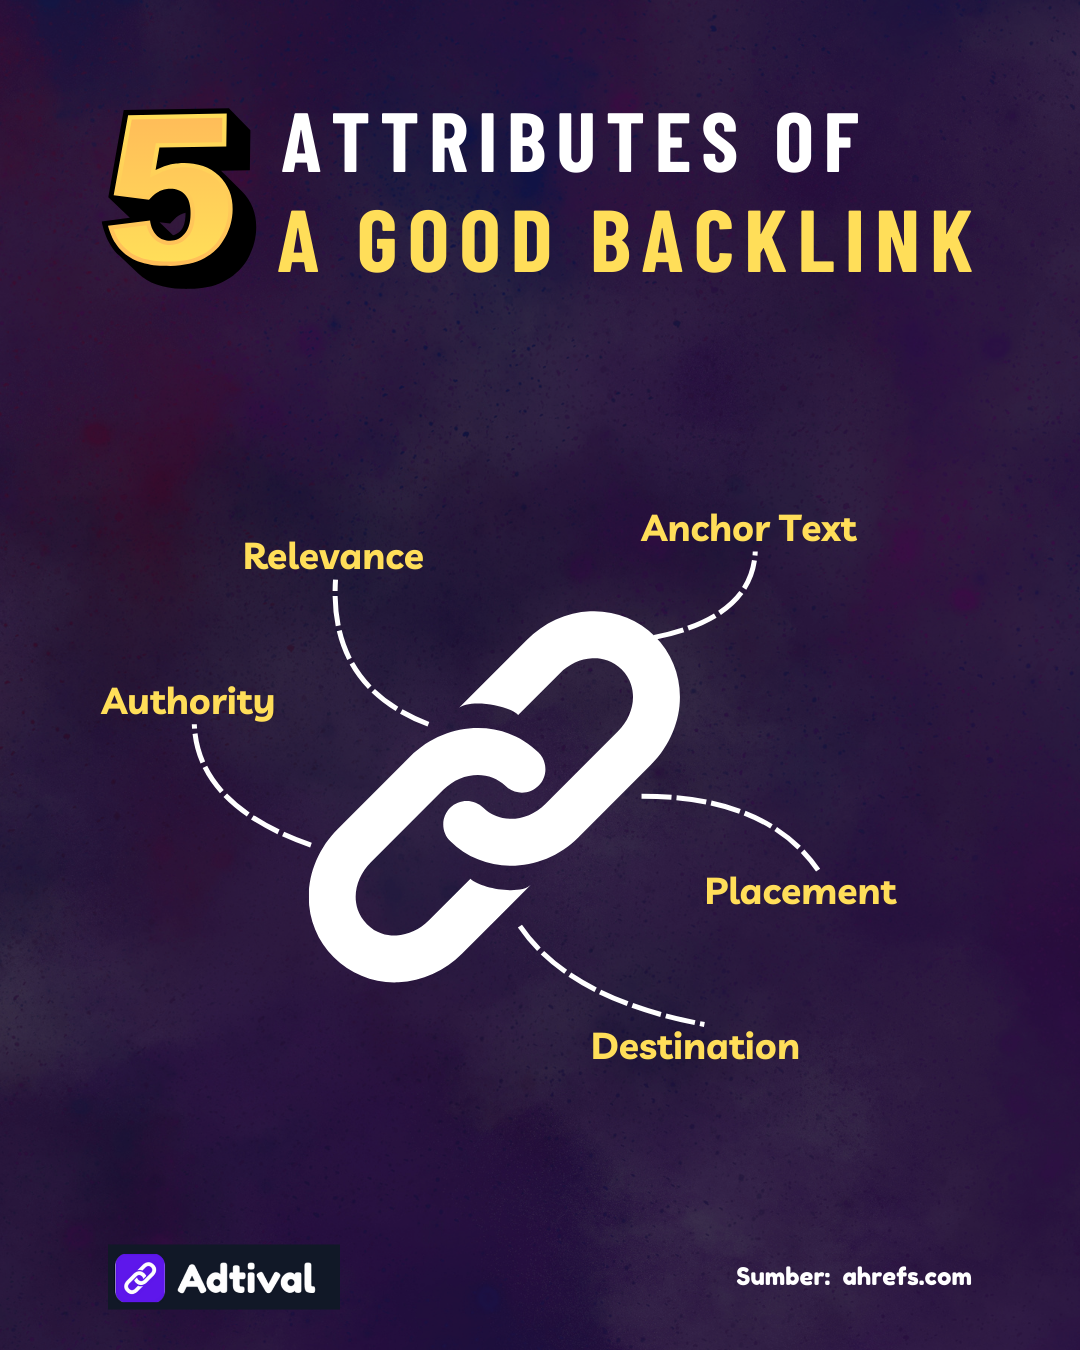 5 Attributes of a Good Backlink